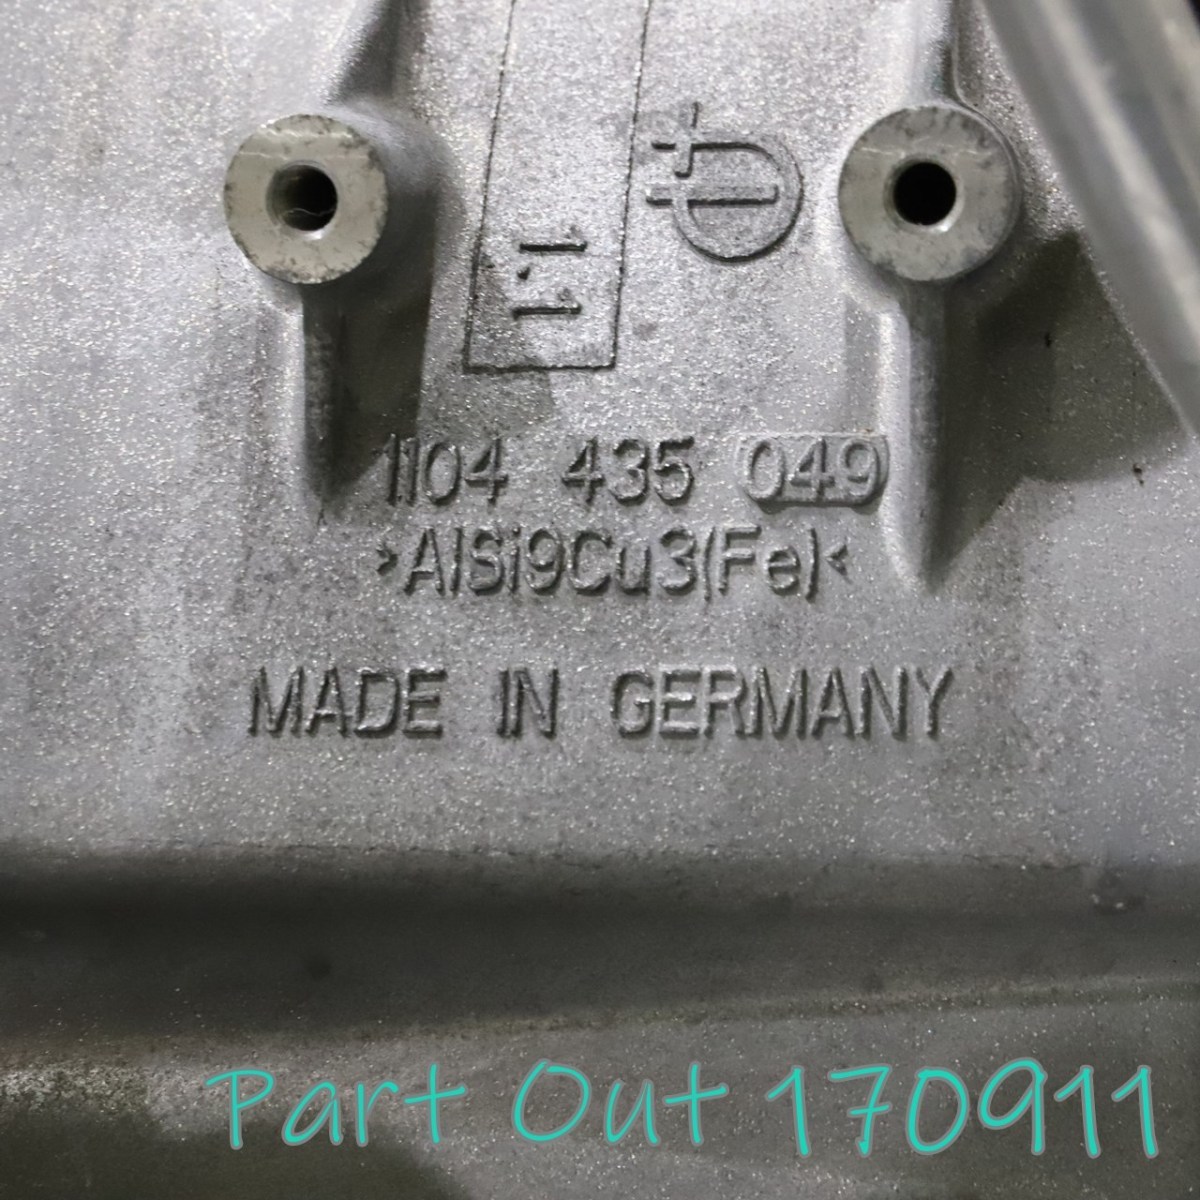 [W-1] Bentley Ben Tey gaW12 8 speed auto matic transmission AT AT 0D6300036QX used 